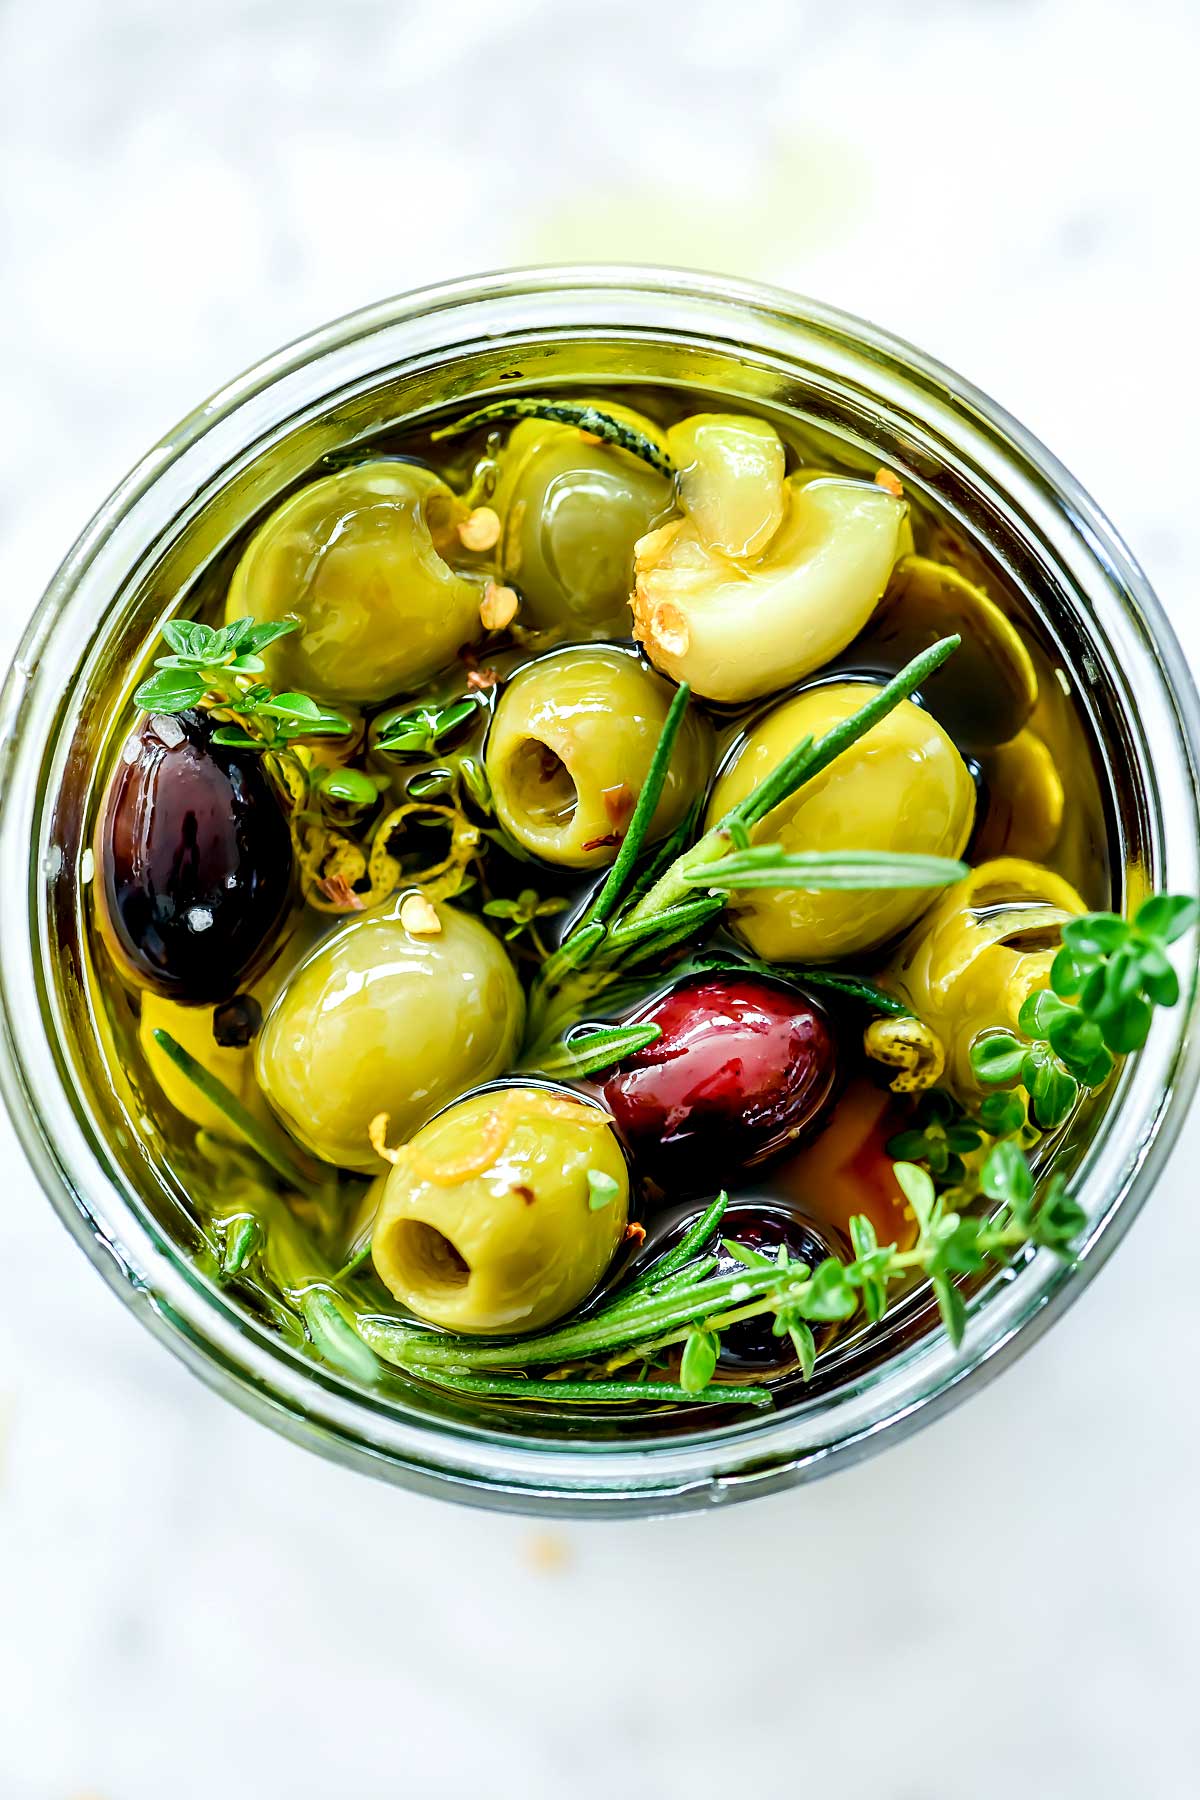 Types of Olives to Buy, Store, and Cook